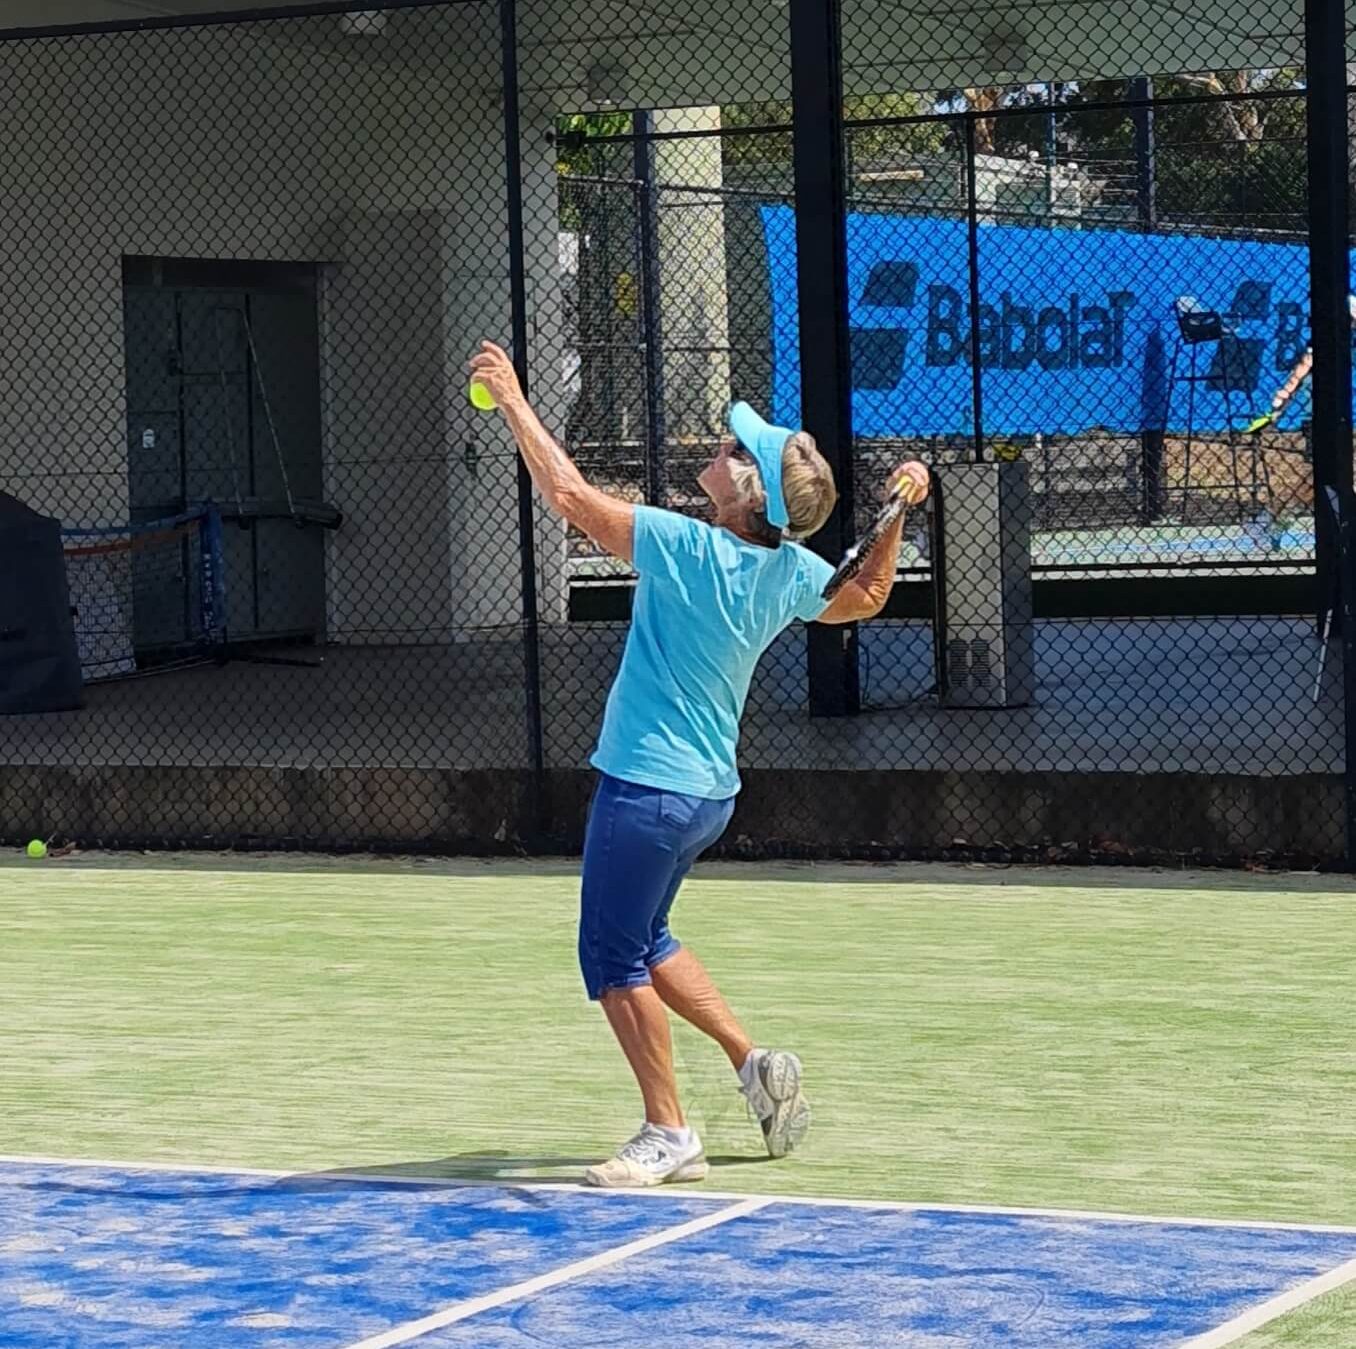 Tennis player hitting ball at Focus Tennis Centre weekly Adult Competition